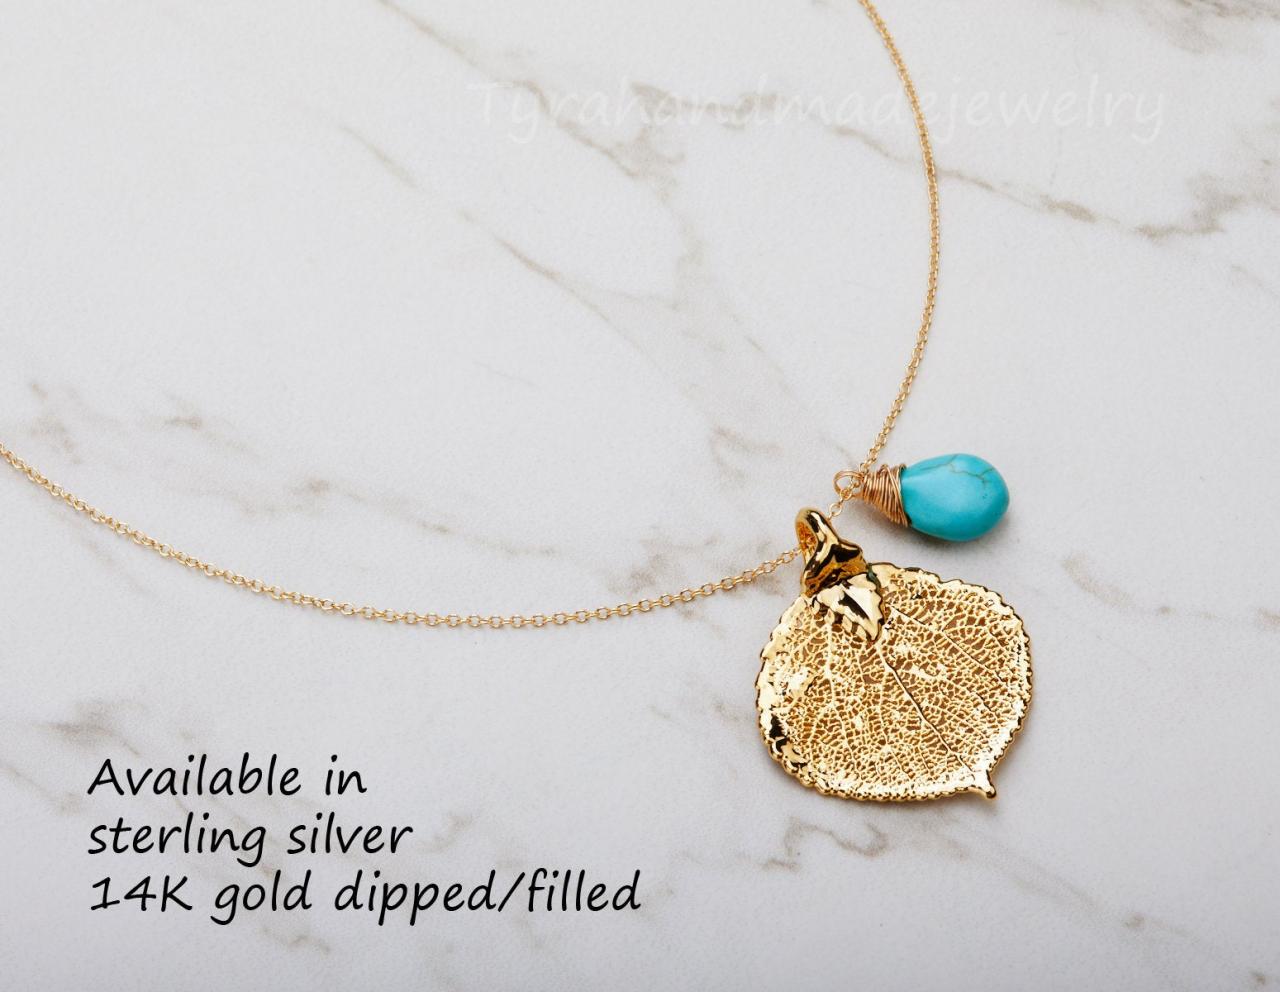 Gold Aspen Leaf Necklace,real Leaf Necklace,turquoise,custom Birthstone,bridesmaid Gift,autumn Fall Wedding Jewelry Gift,custom Jewelry Note